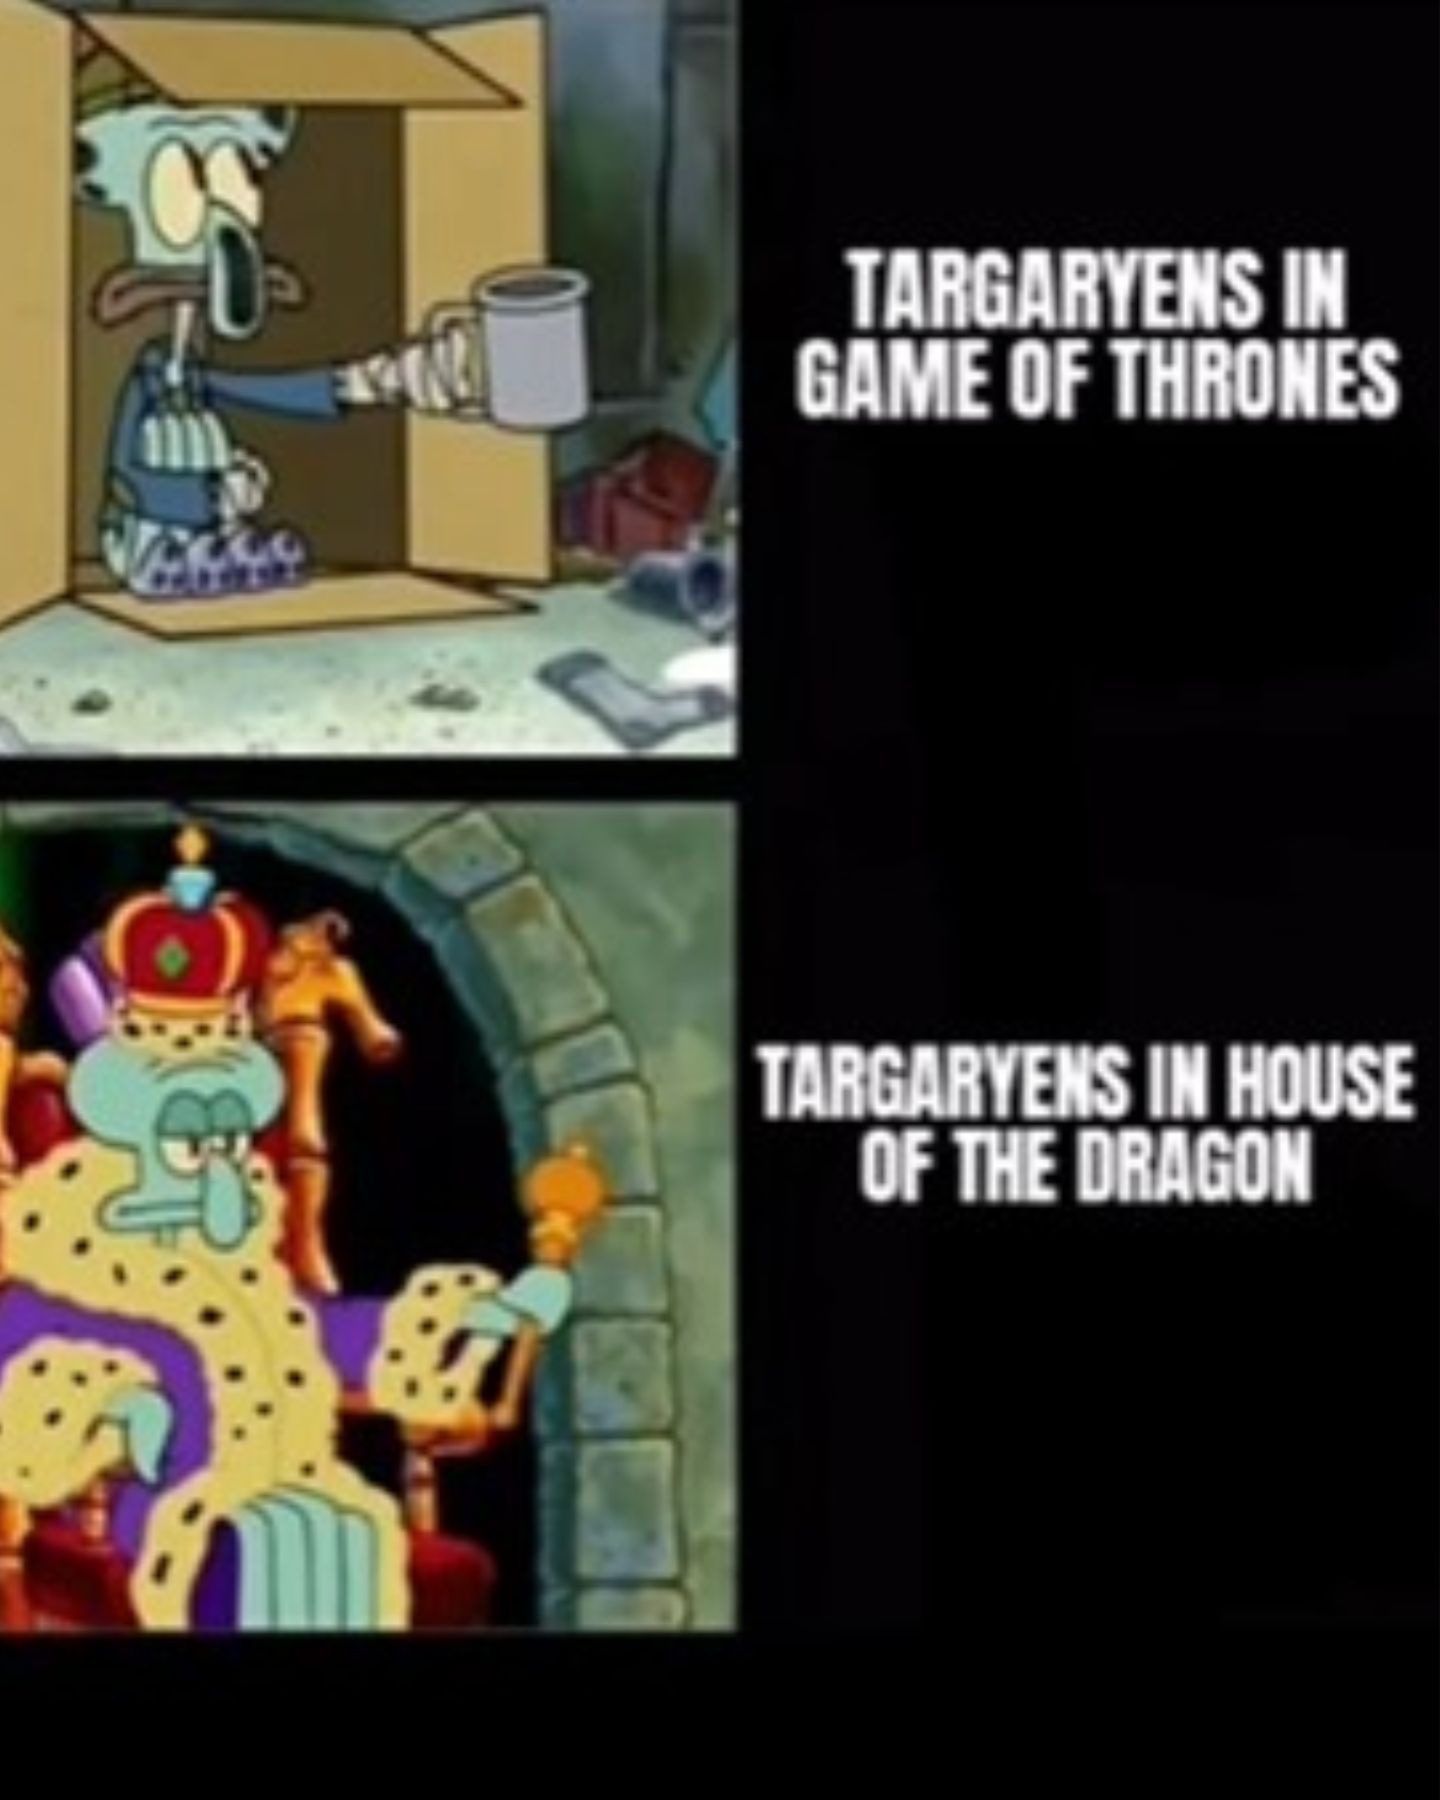 Meme comparing the Targaryens in Game of Thrones and House of the Dragon. 